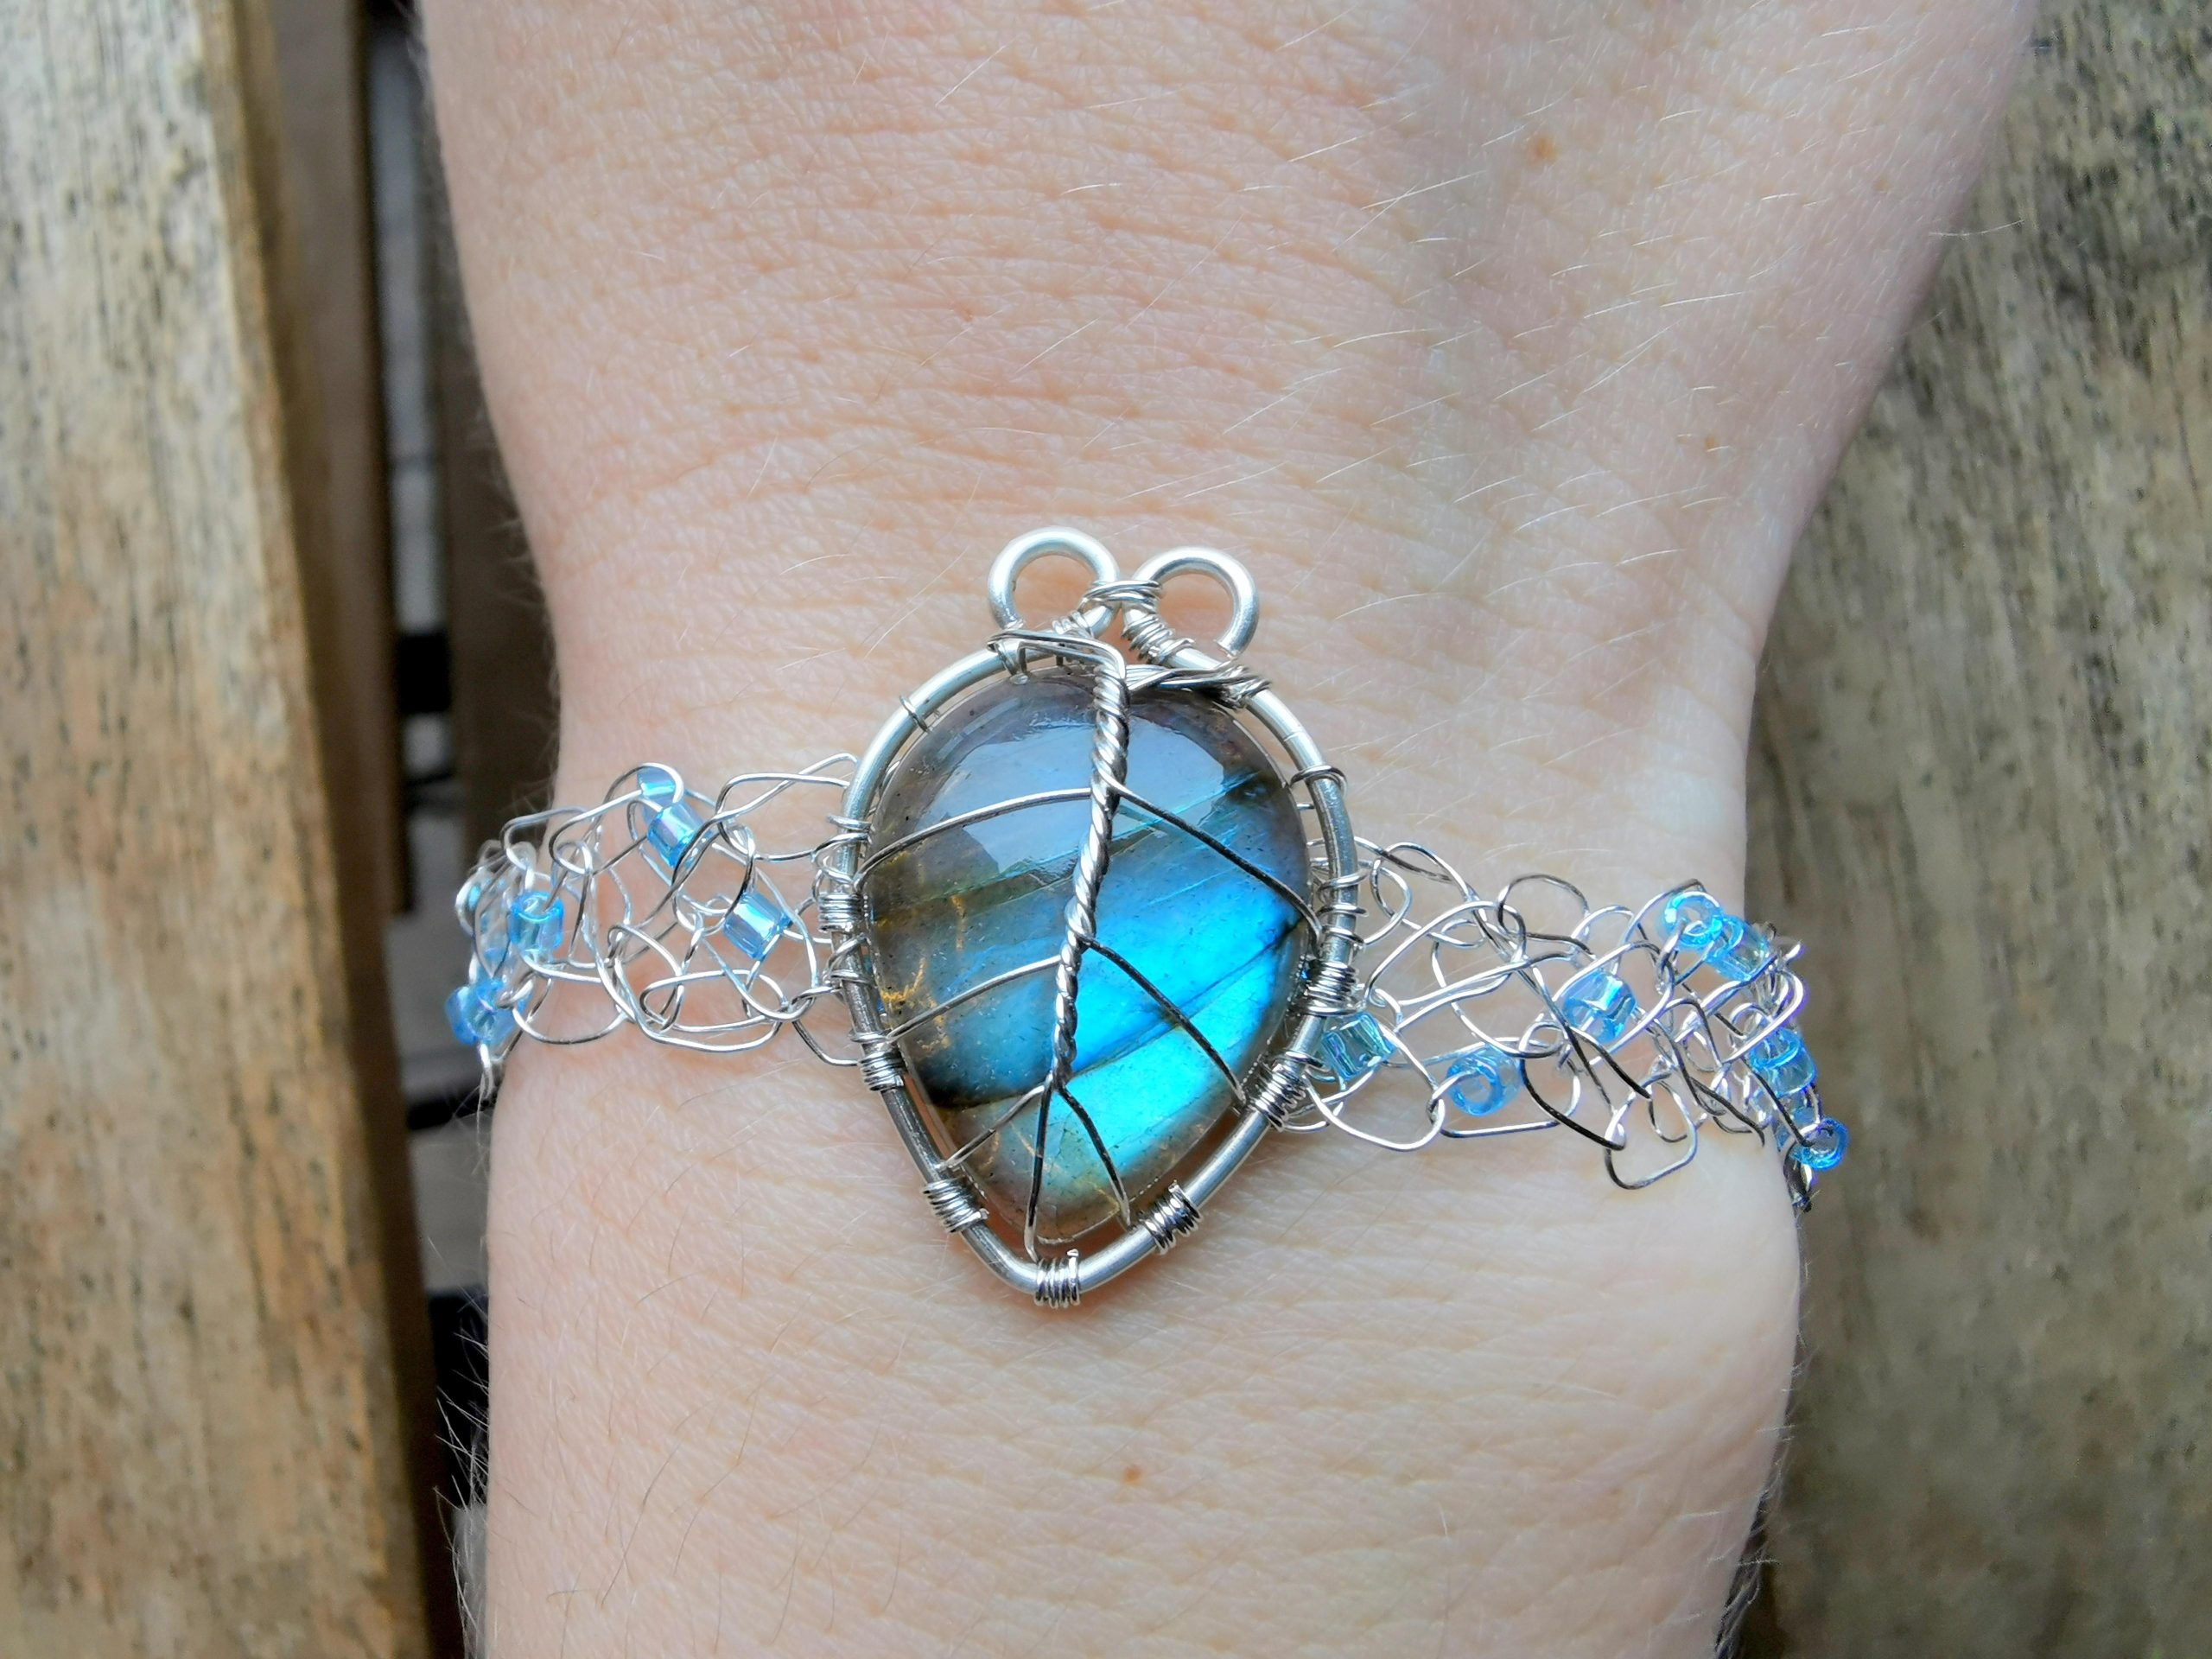 It’s miles a leaf bracelet I made by crocheting with 0.3 mm wire. The gemstone is a labradorite.